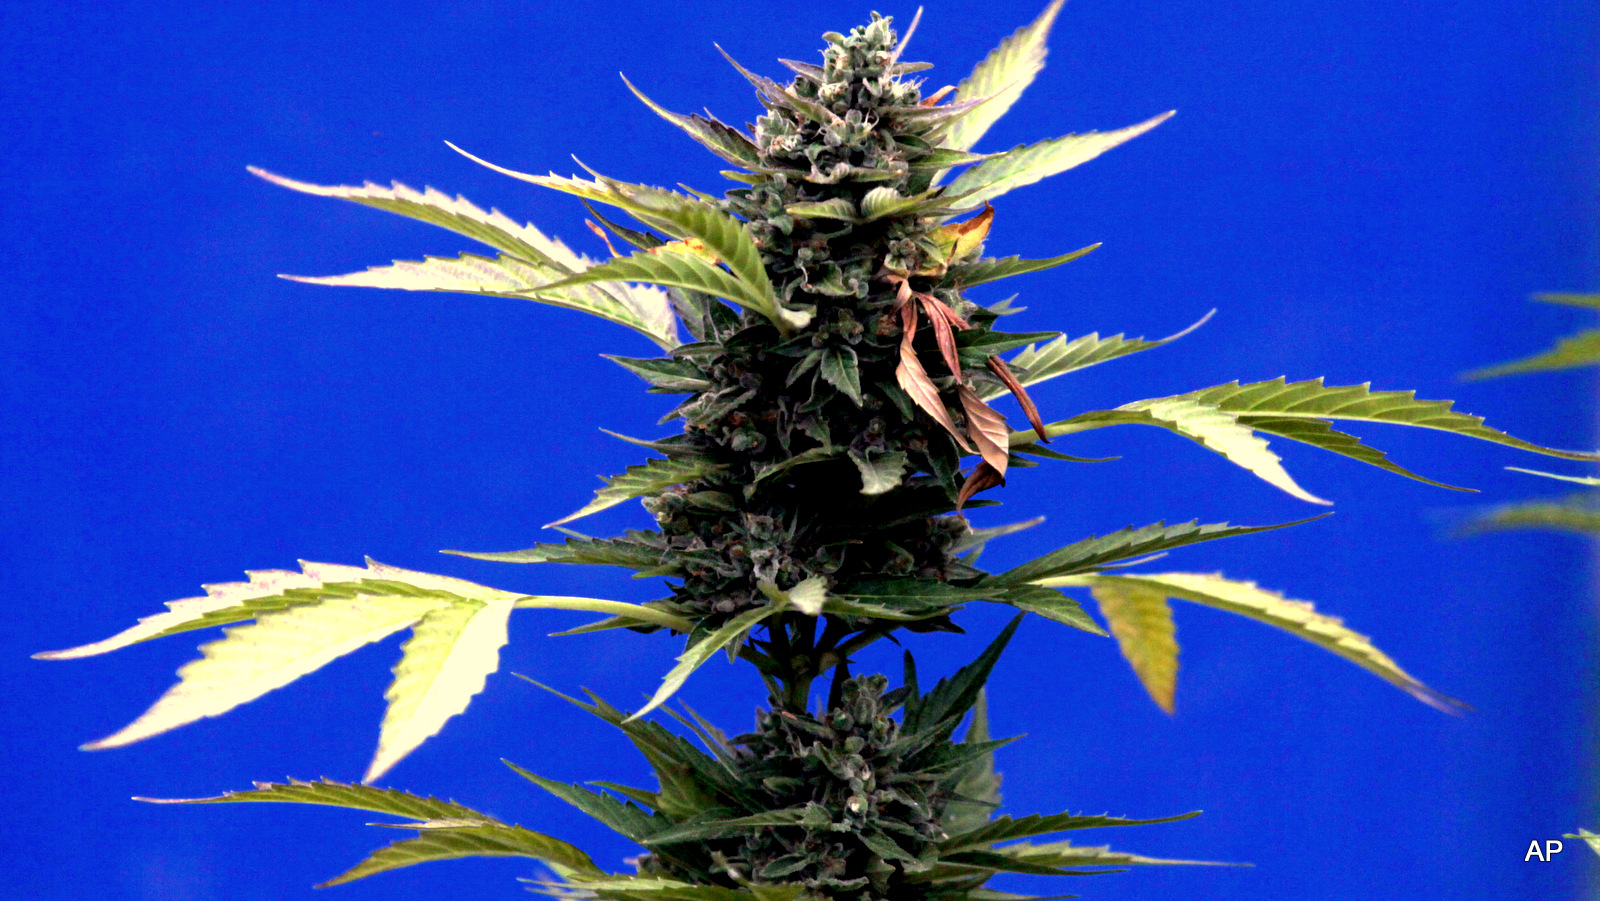 A marijuana plant stands during a press presentation of a legal medicinal marijuana harvest in the La Florida municipality of Santiago, Chile, Tuesday, April 7, 2015. Planting, selling and transporting marijuana is usually illegal in Chile and carries prison terms of up to 15 years. But the law allows medical use of marijuana with the authorization of several ministries.